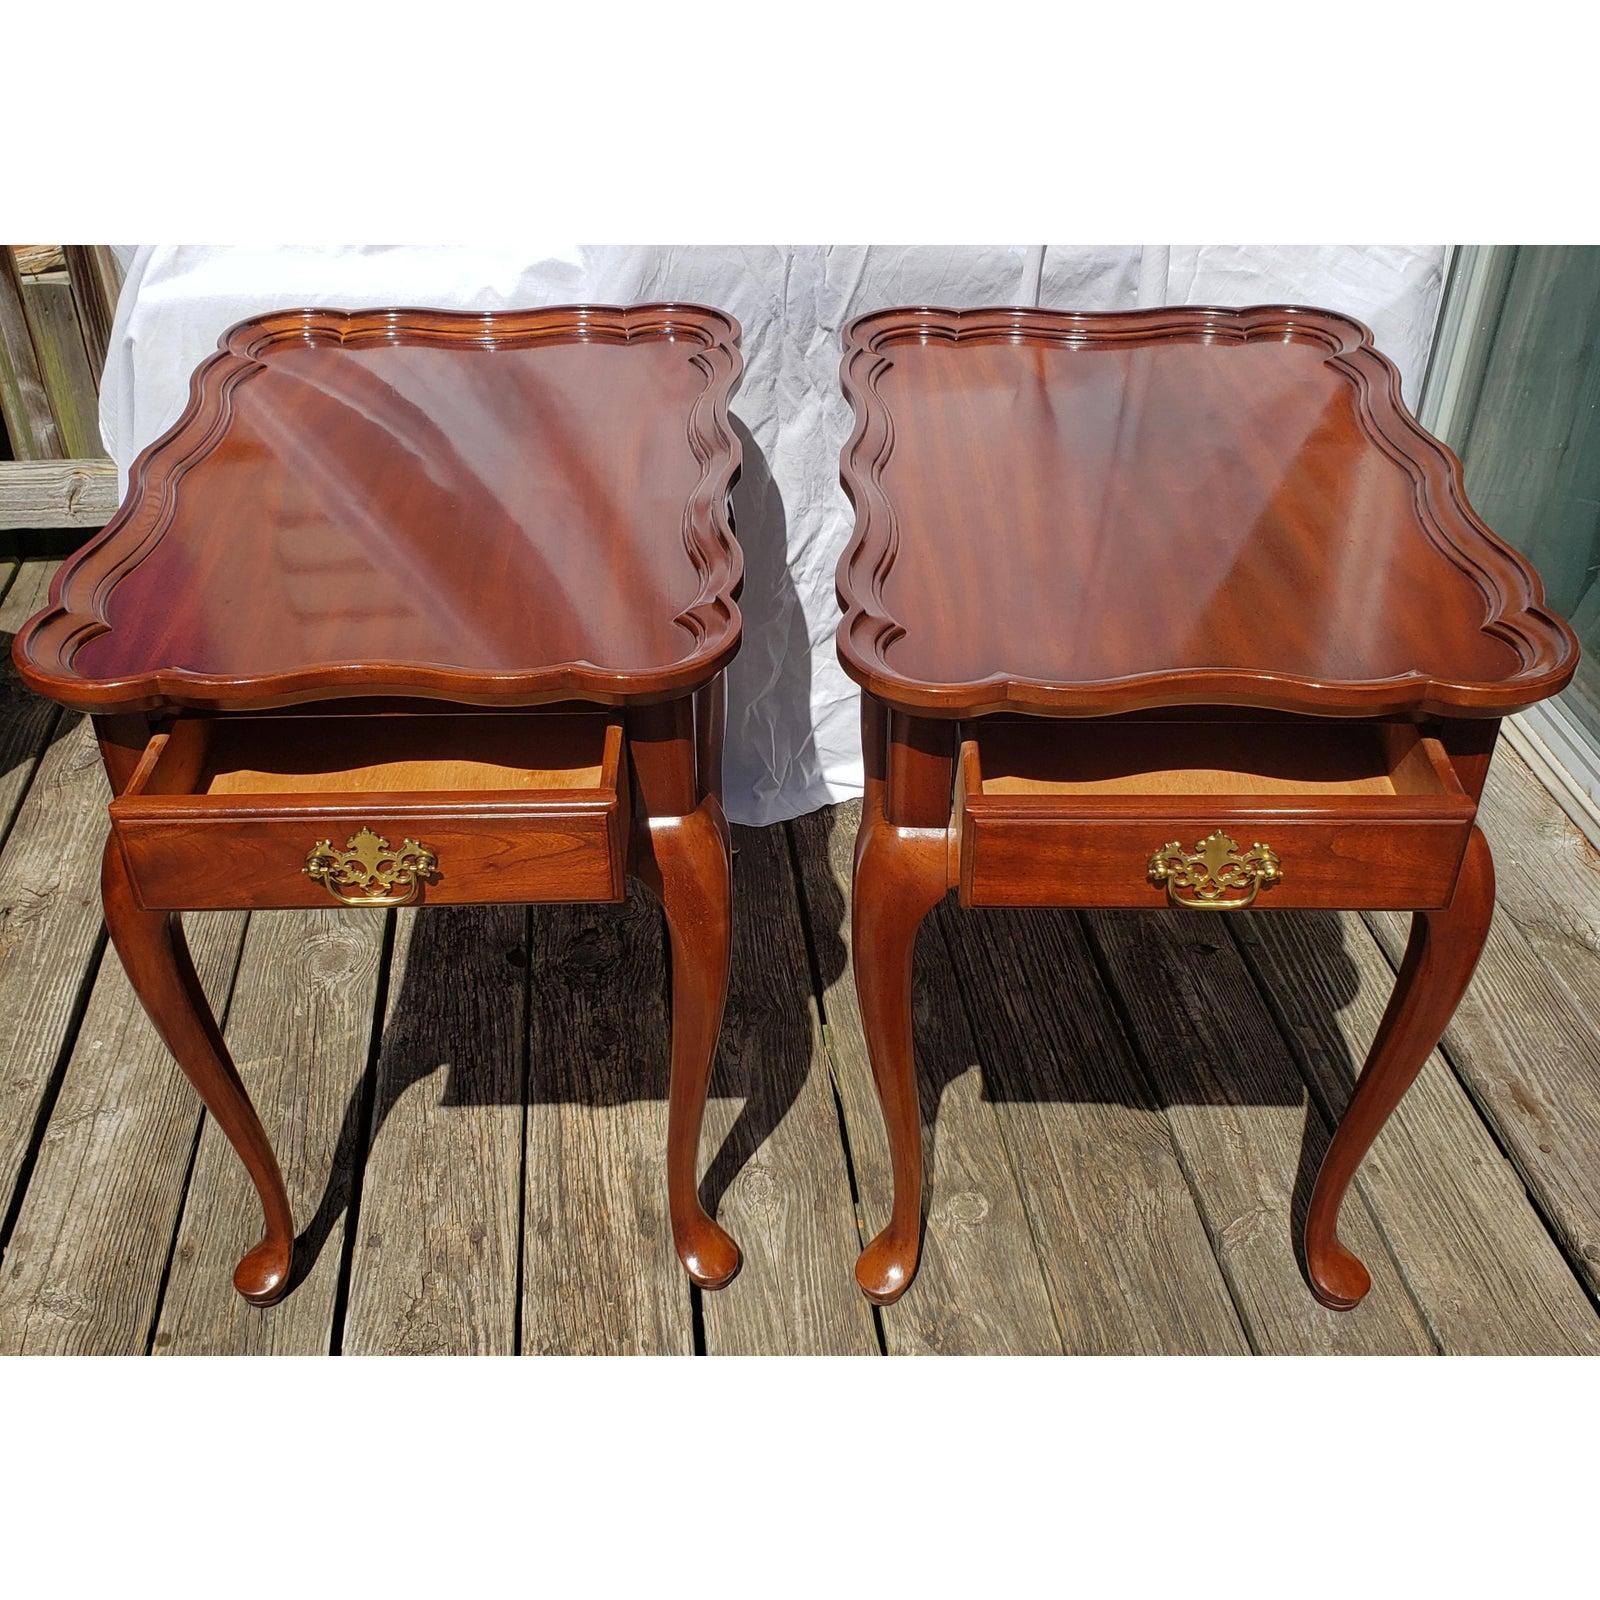 Queen Anne 1960s Superior Furniture Solid Walnut Scallop Top Side Tables, a Pair